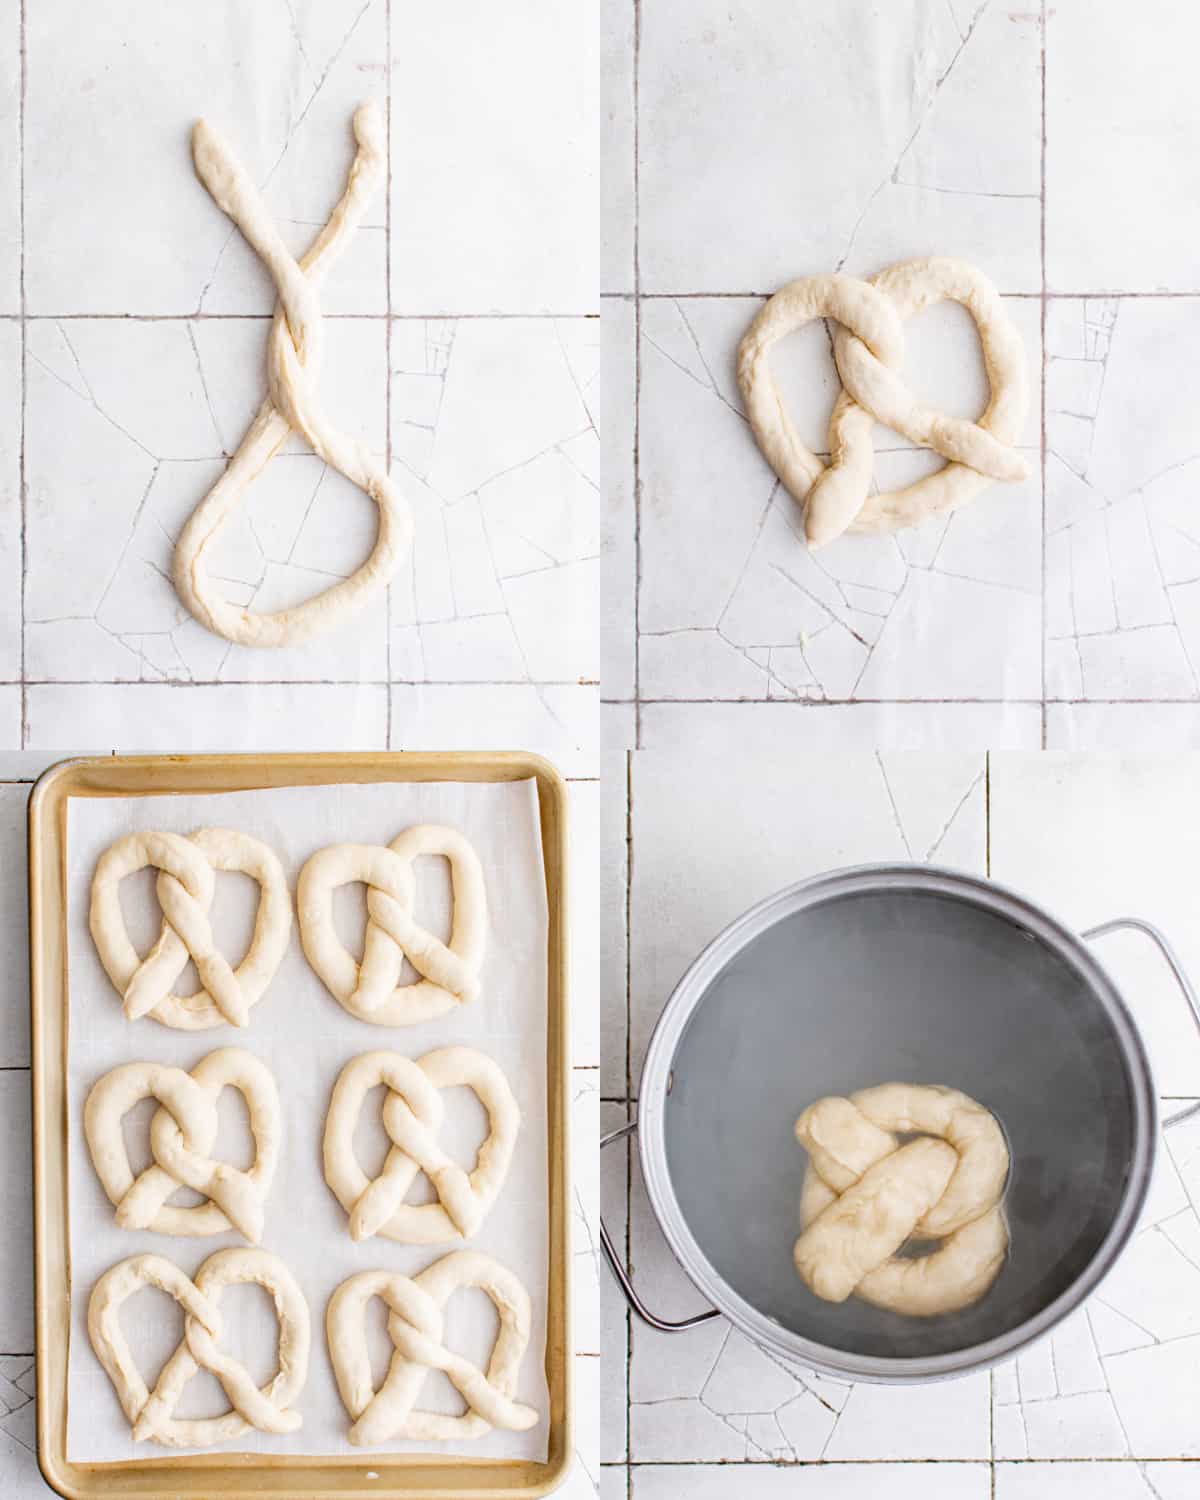 twisting the pretzels into shape before boiling them in water